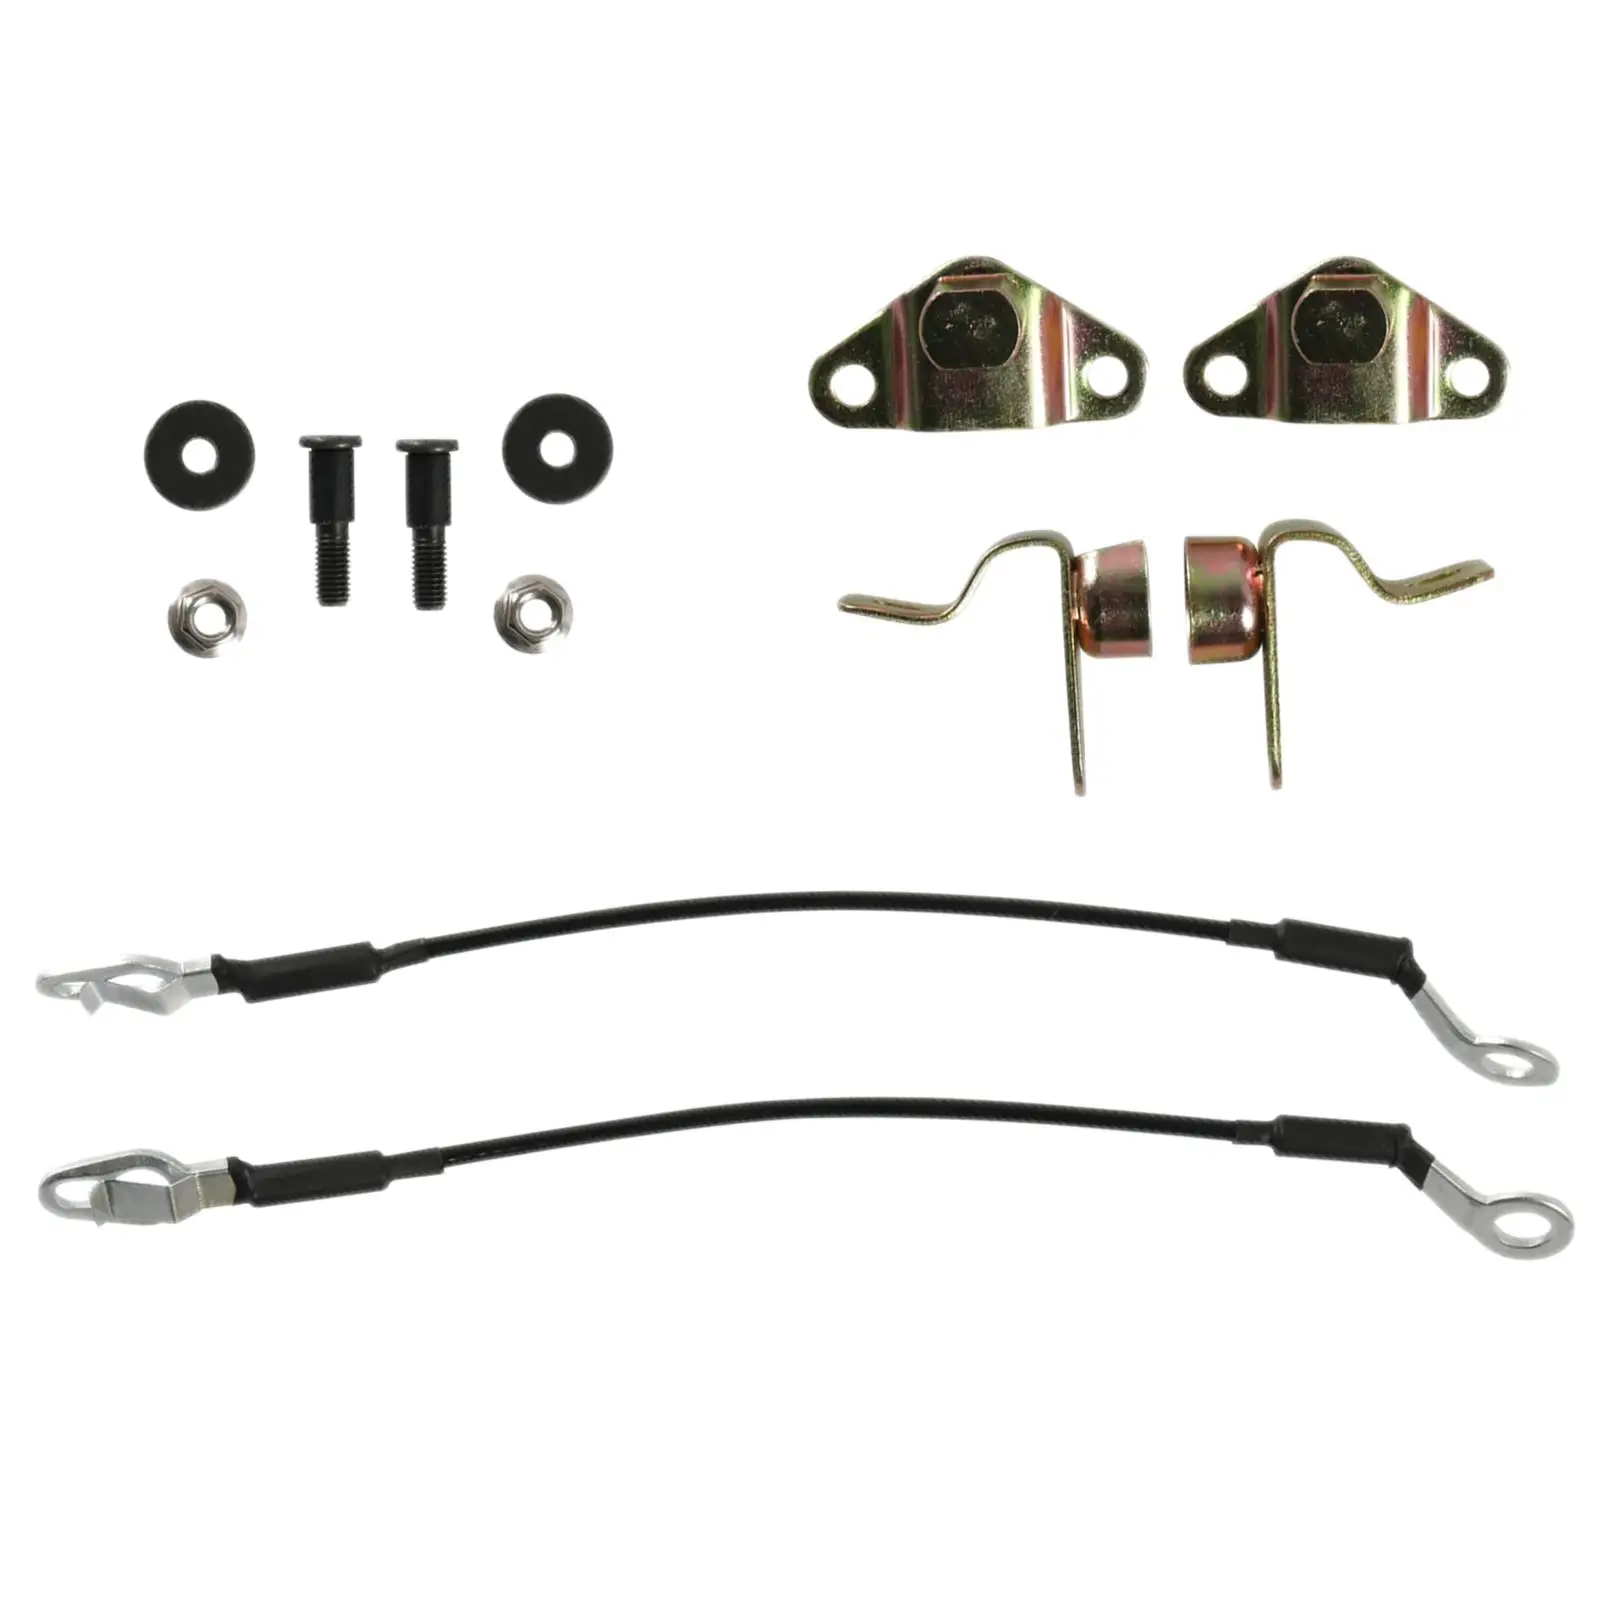 Vehicle Tailgate Hinges Cables, Hinge   Tools for Pickup 999-2006 11570162, 88980509